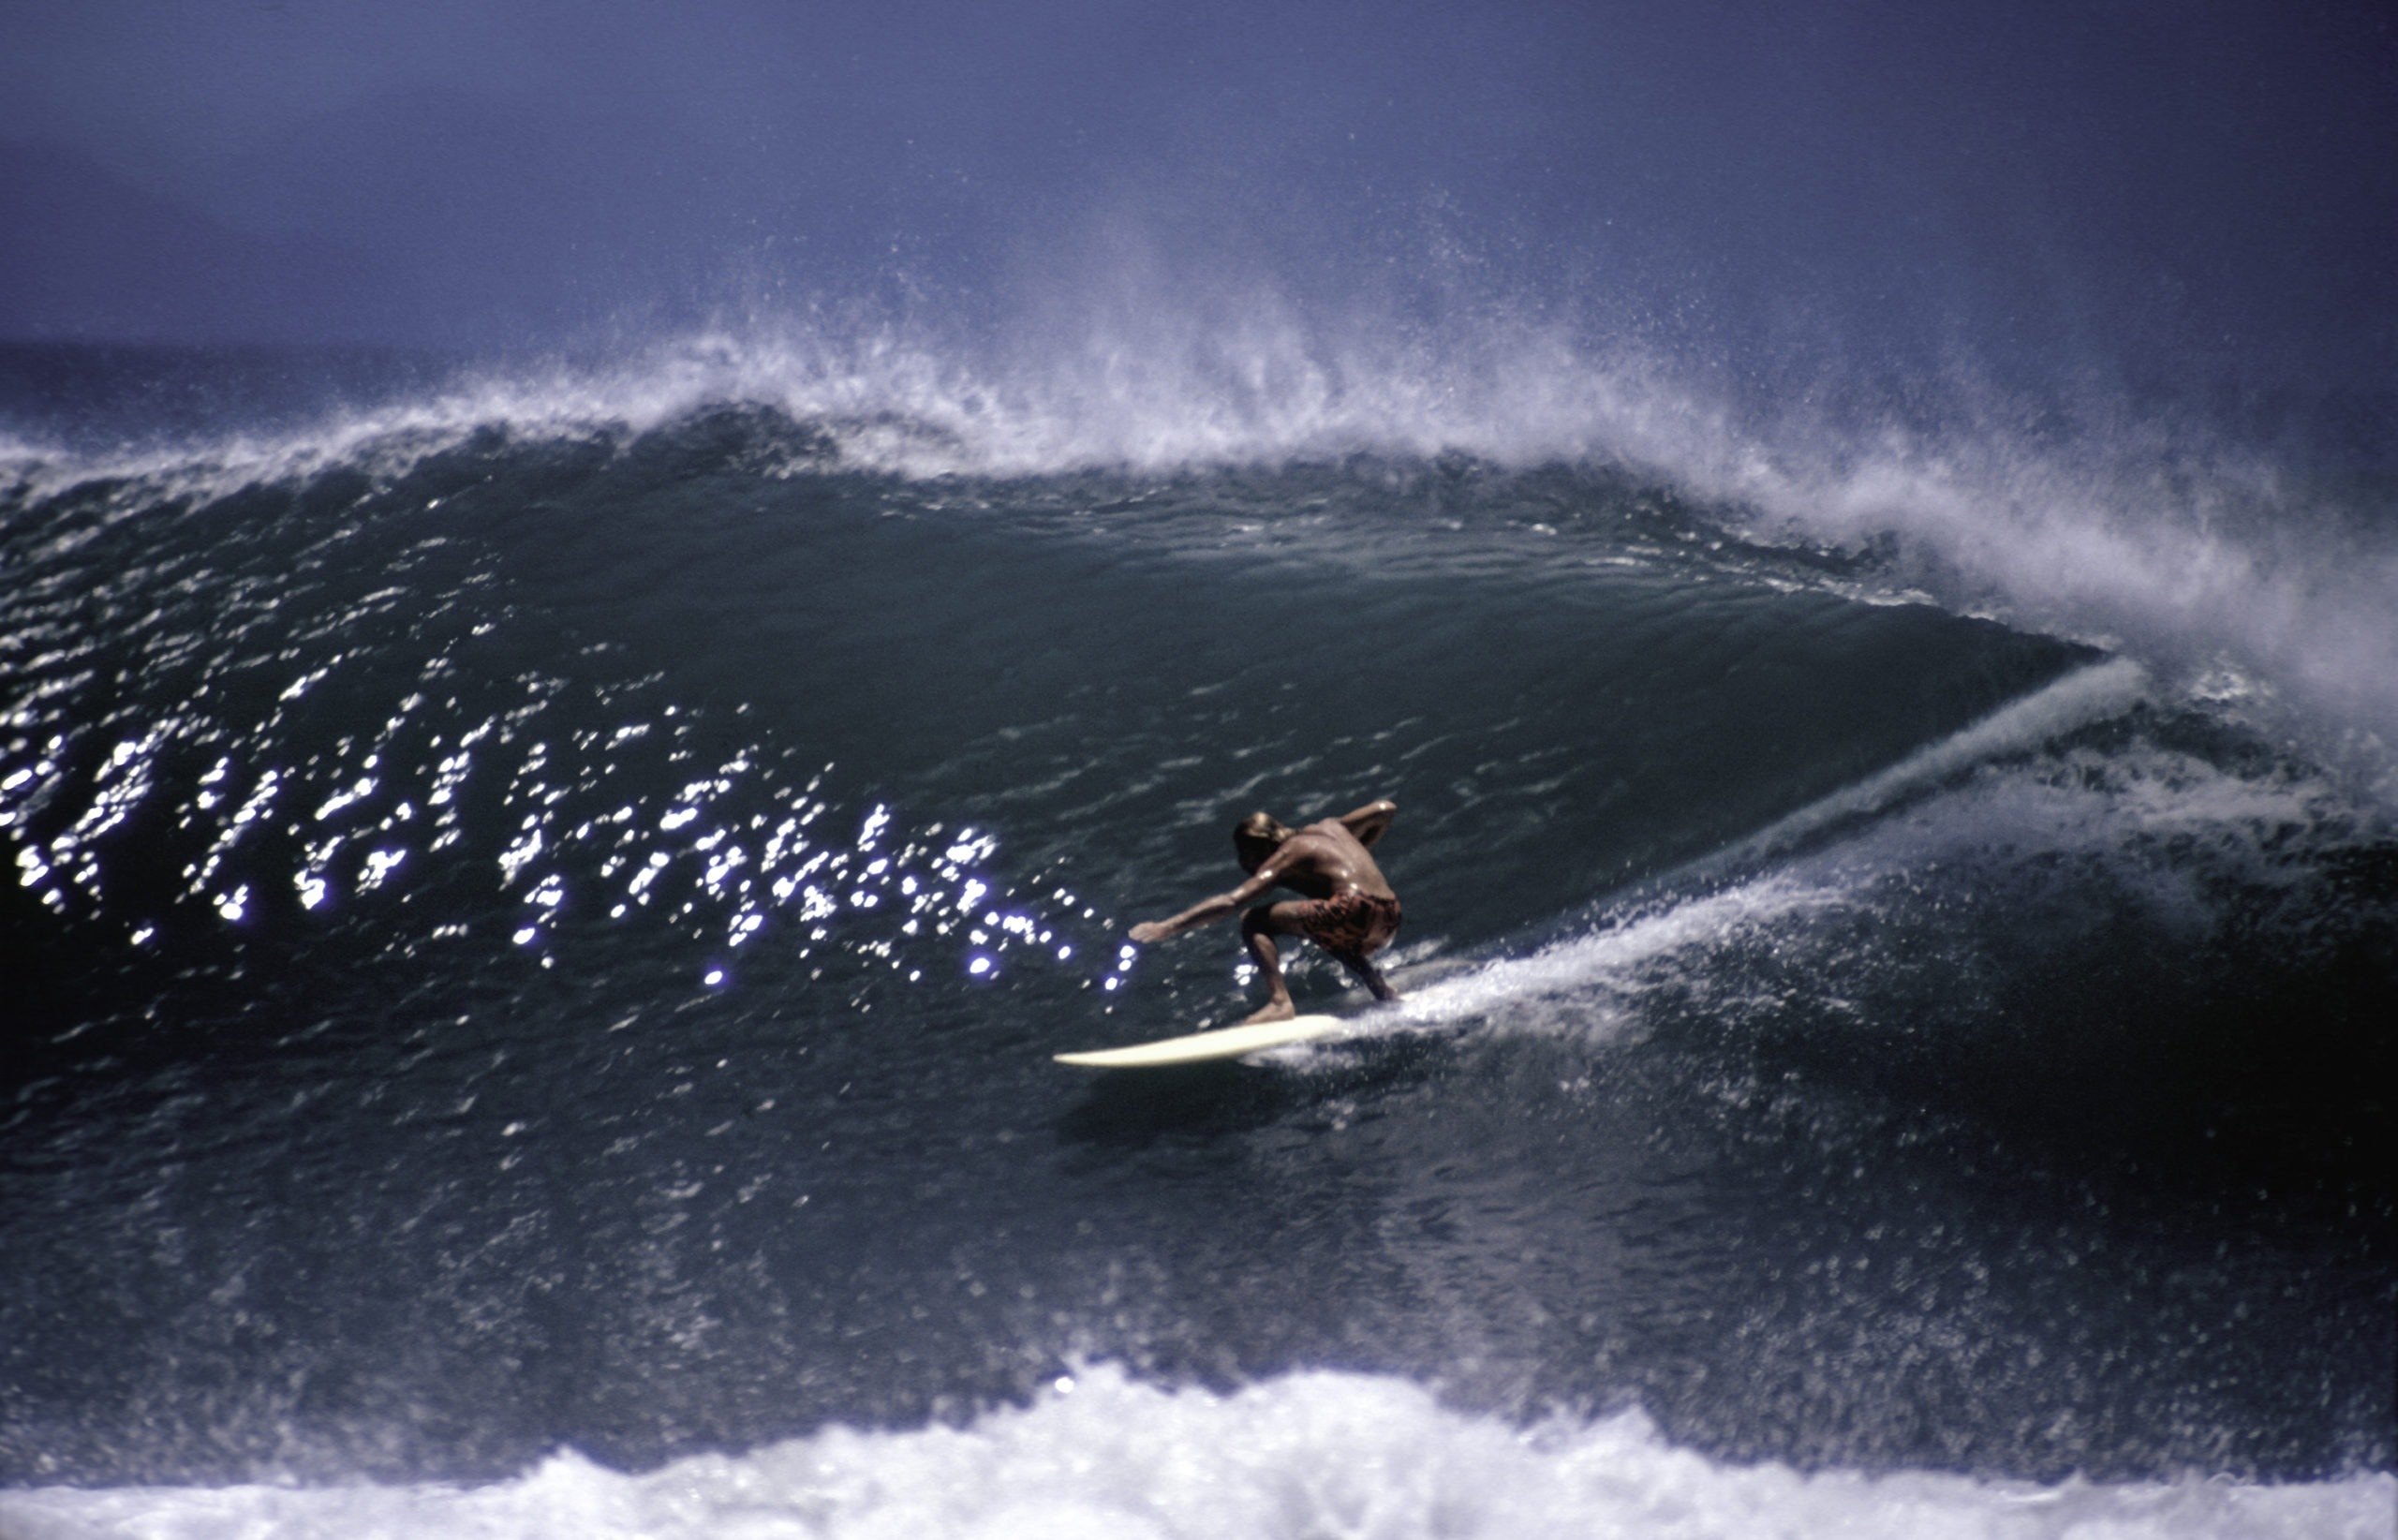 Hampton Bays native Eric Penny surfing at Petacalco in Mexico in the 1970s.